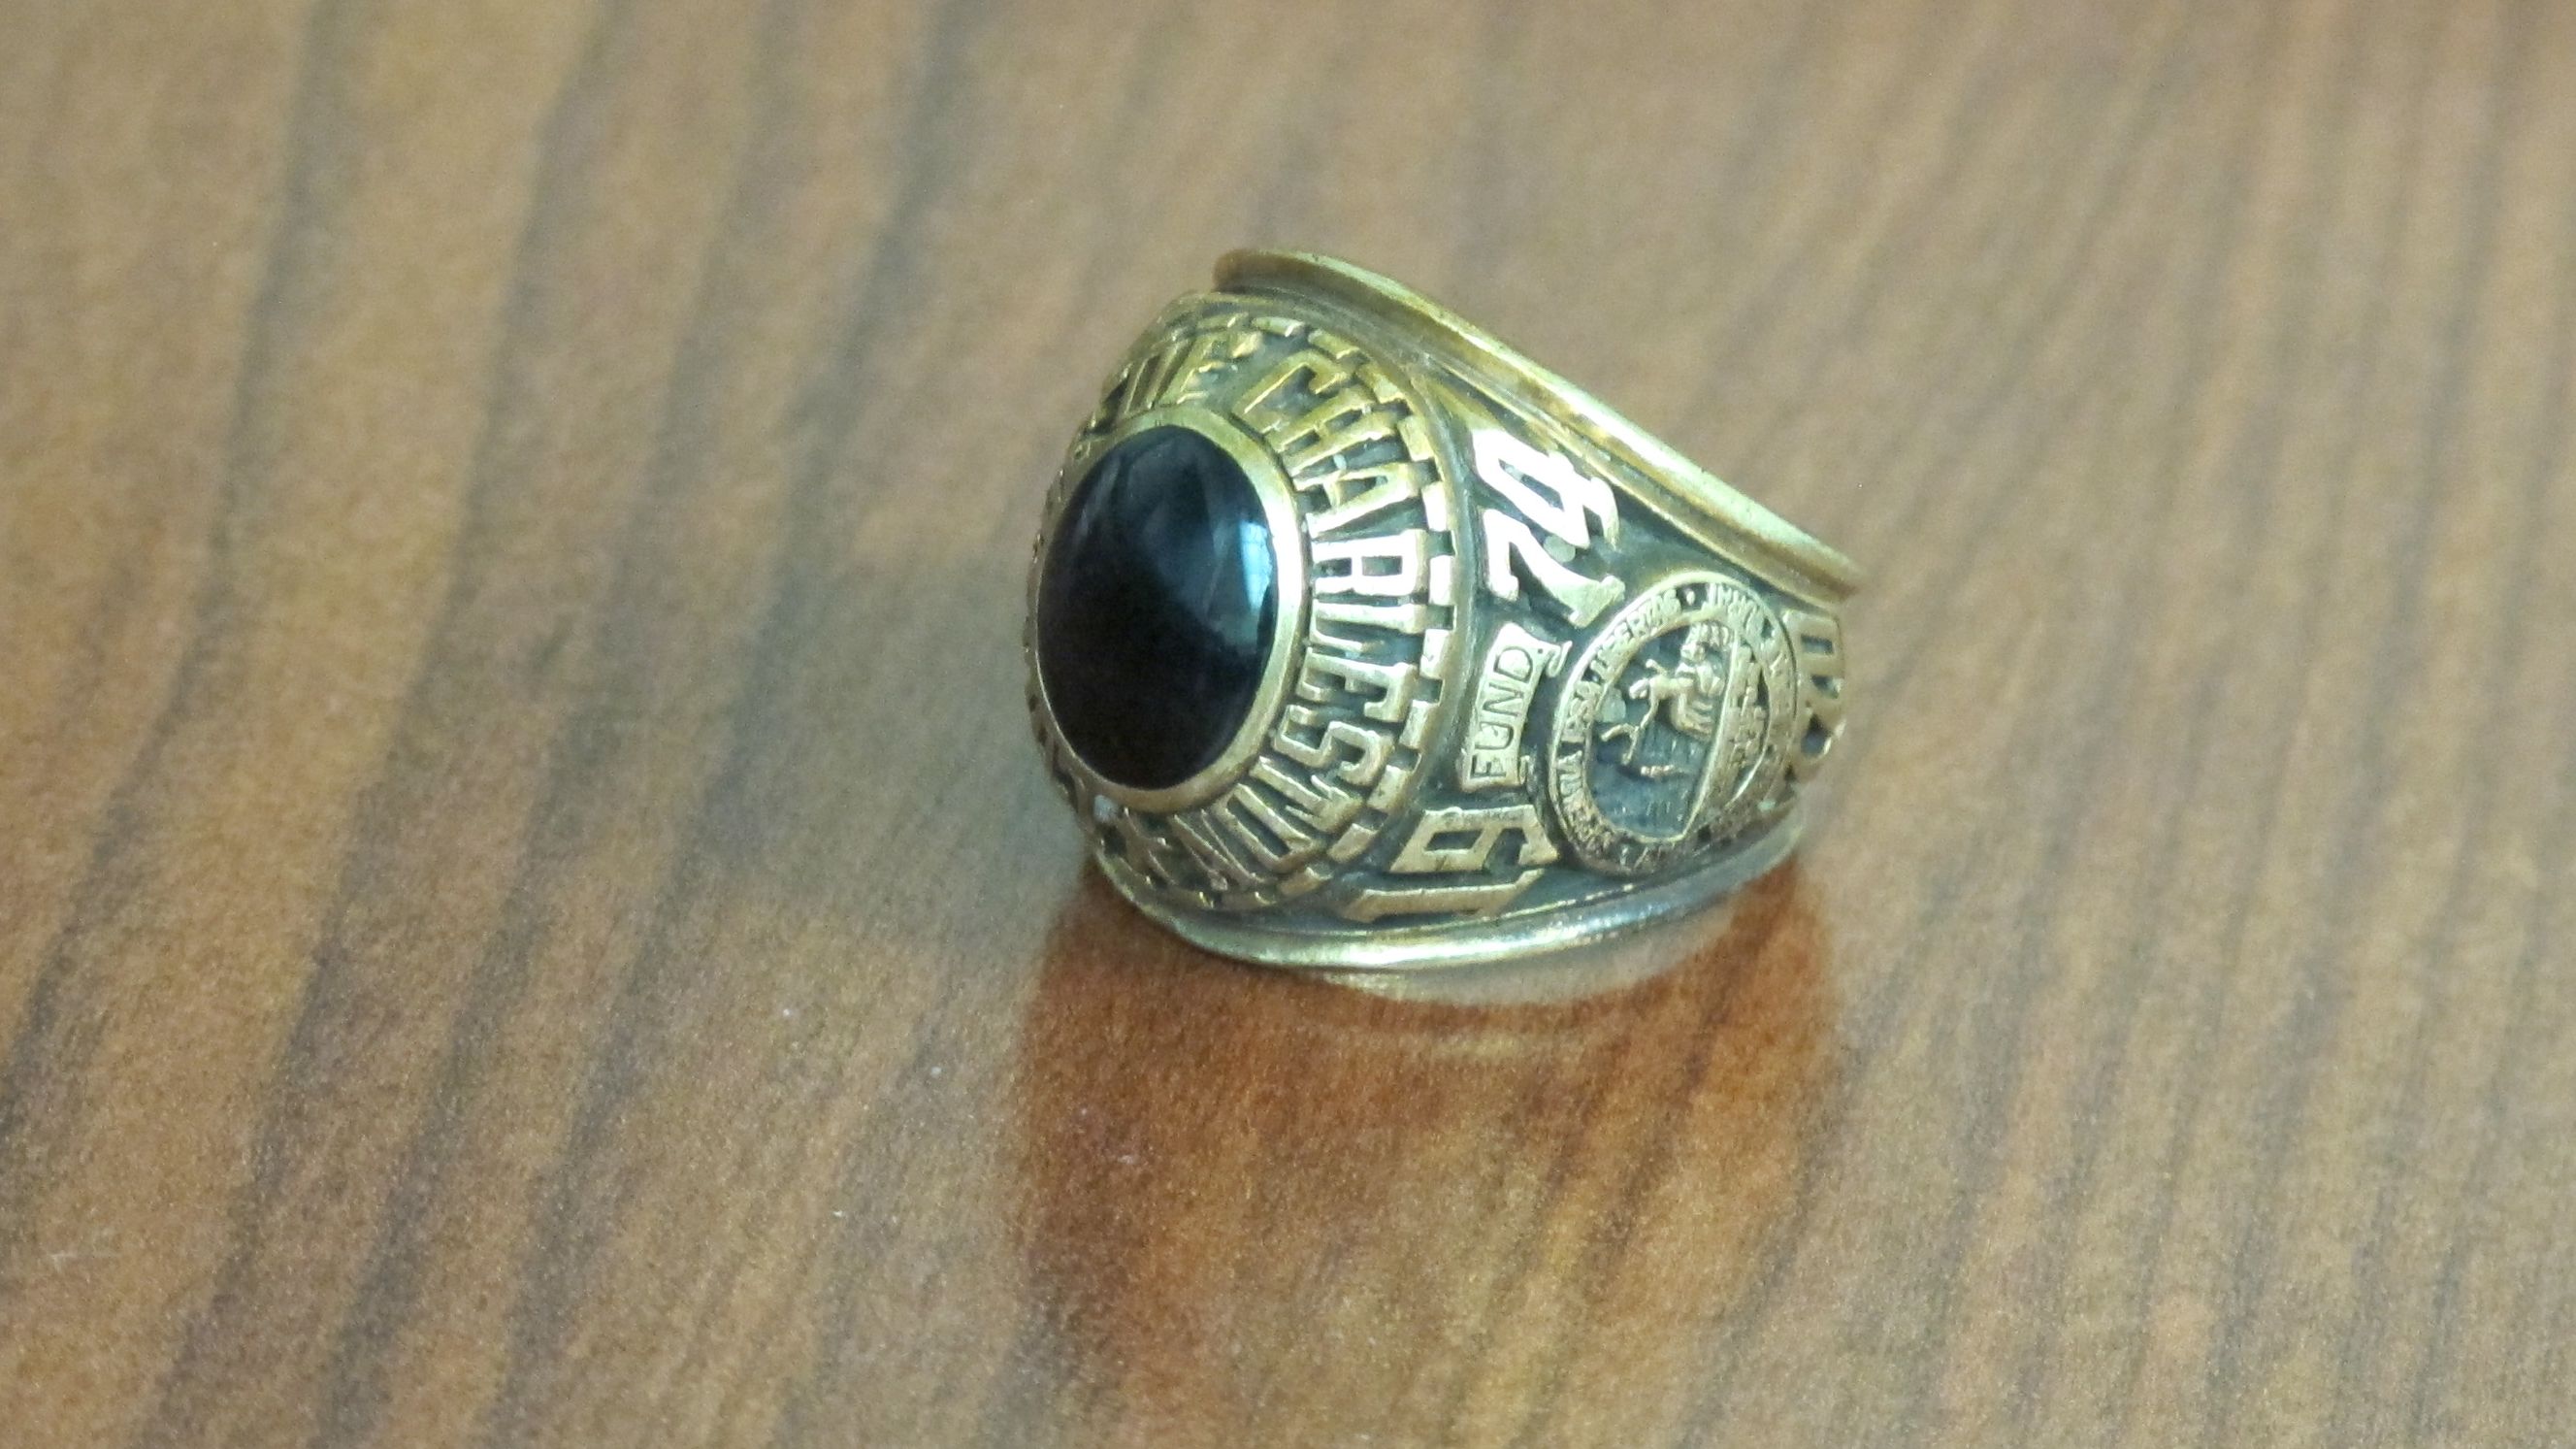 The large, gold ring had the initial RLP inscribed inside it.